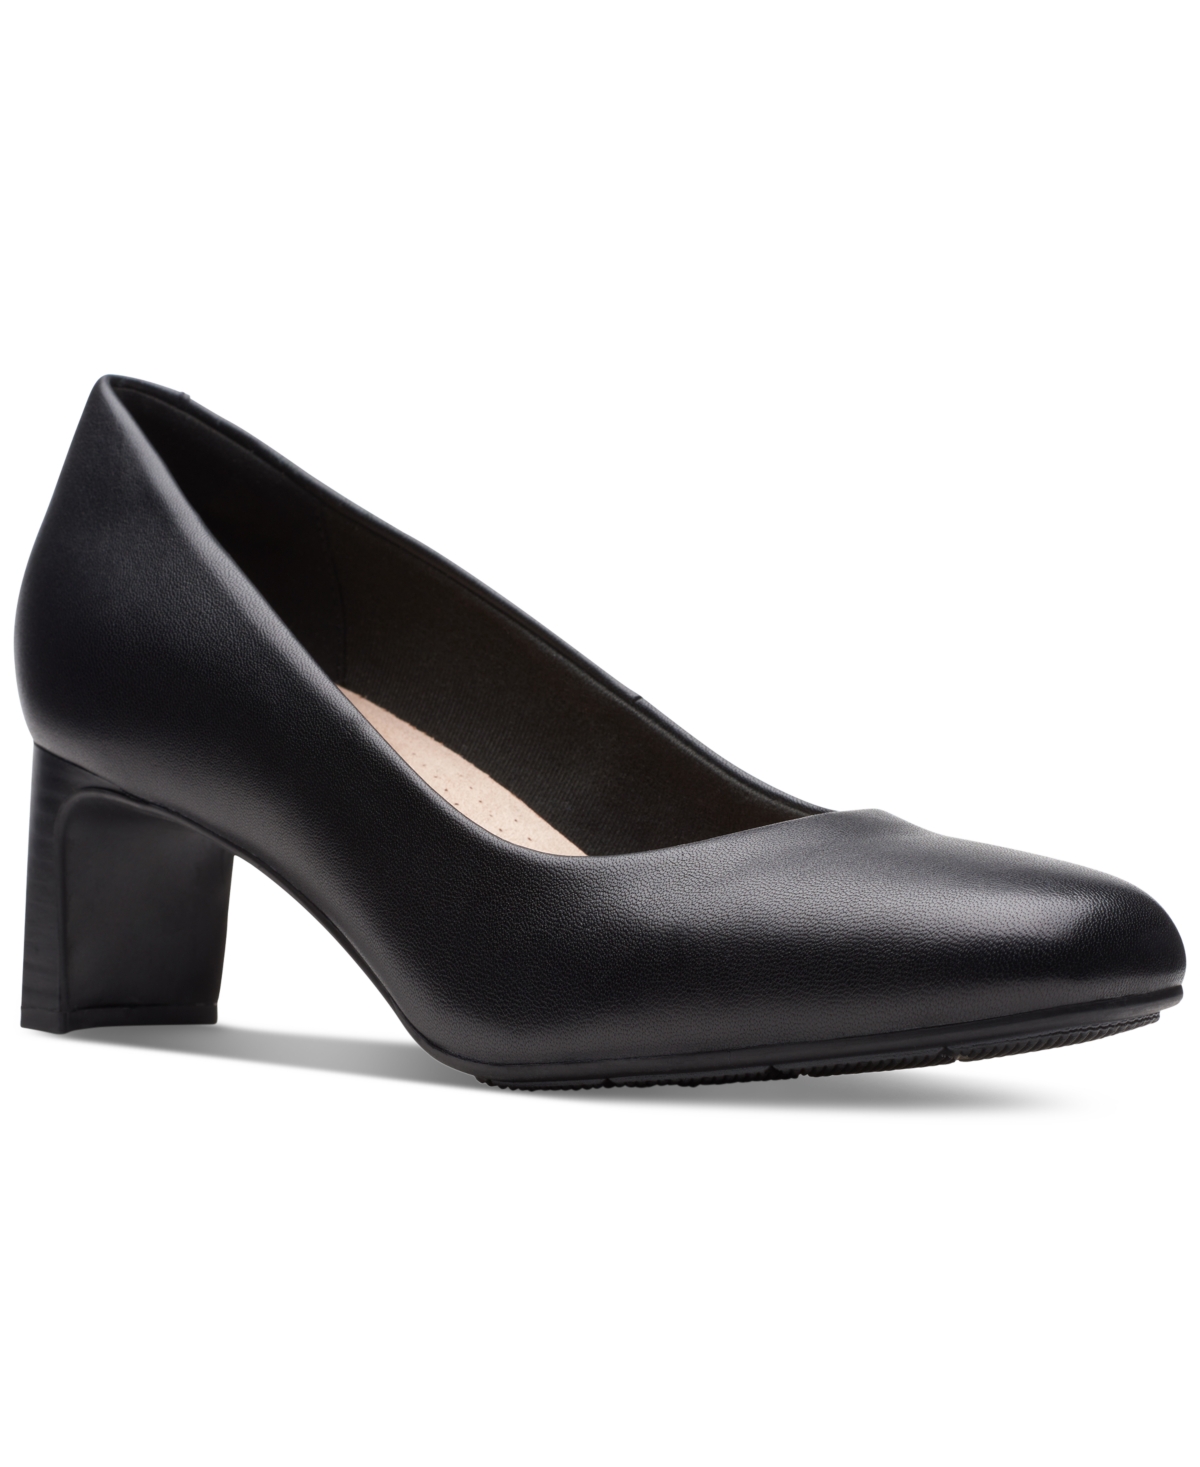 Clarks Women's Kyndall Iris Mid-heeled Comfort Pumps In Black Leather